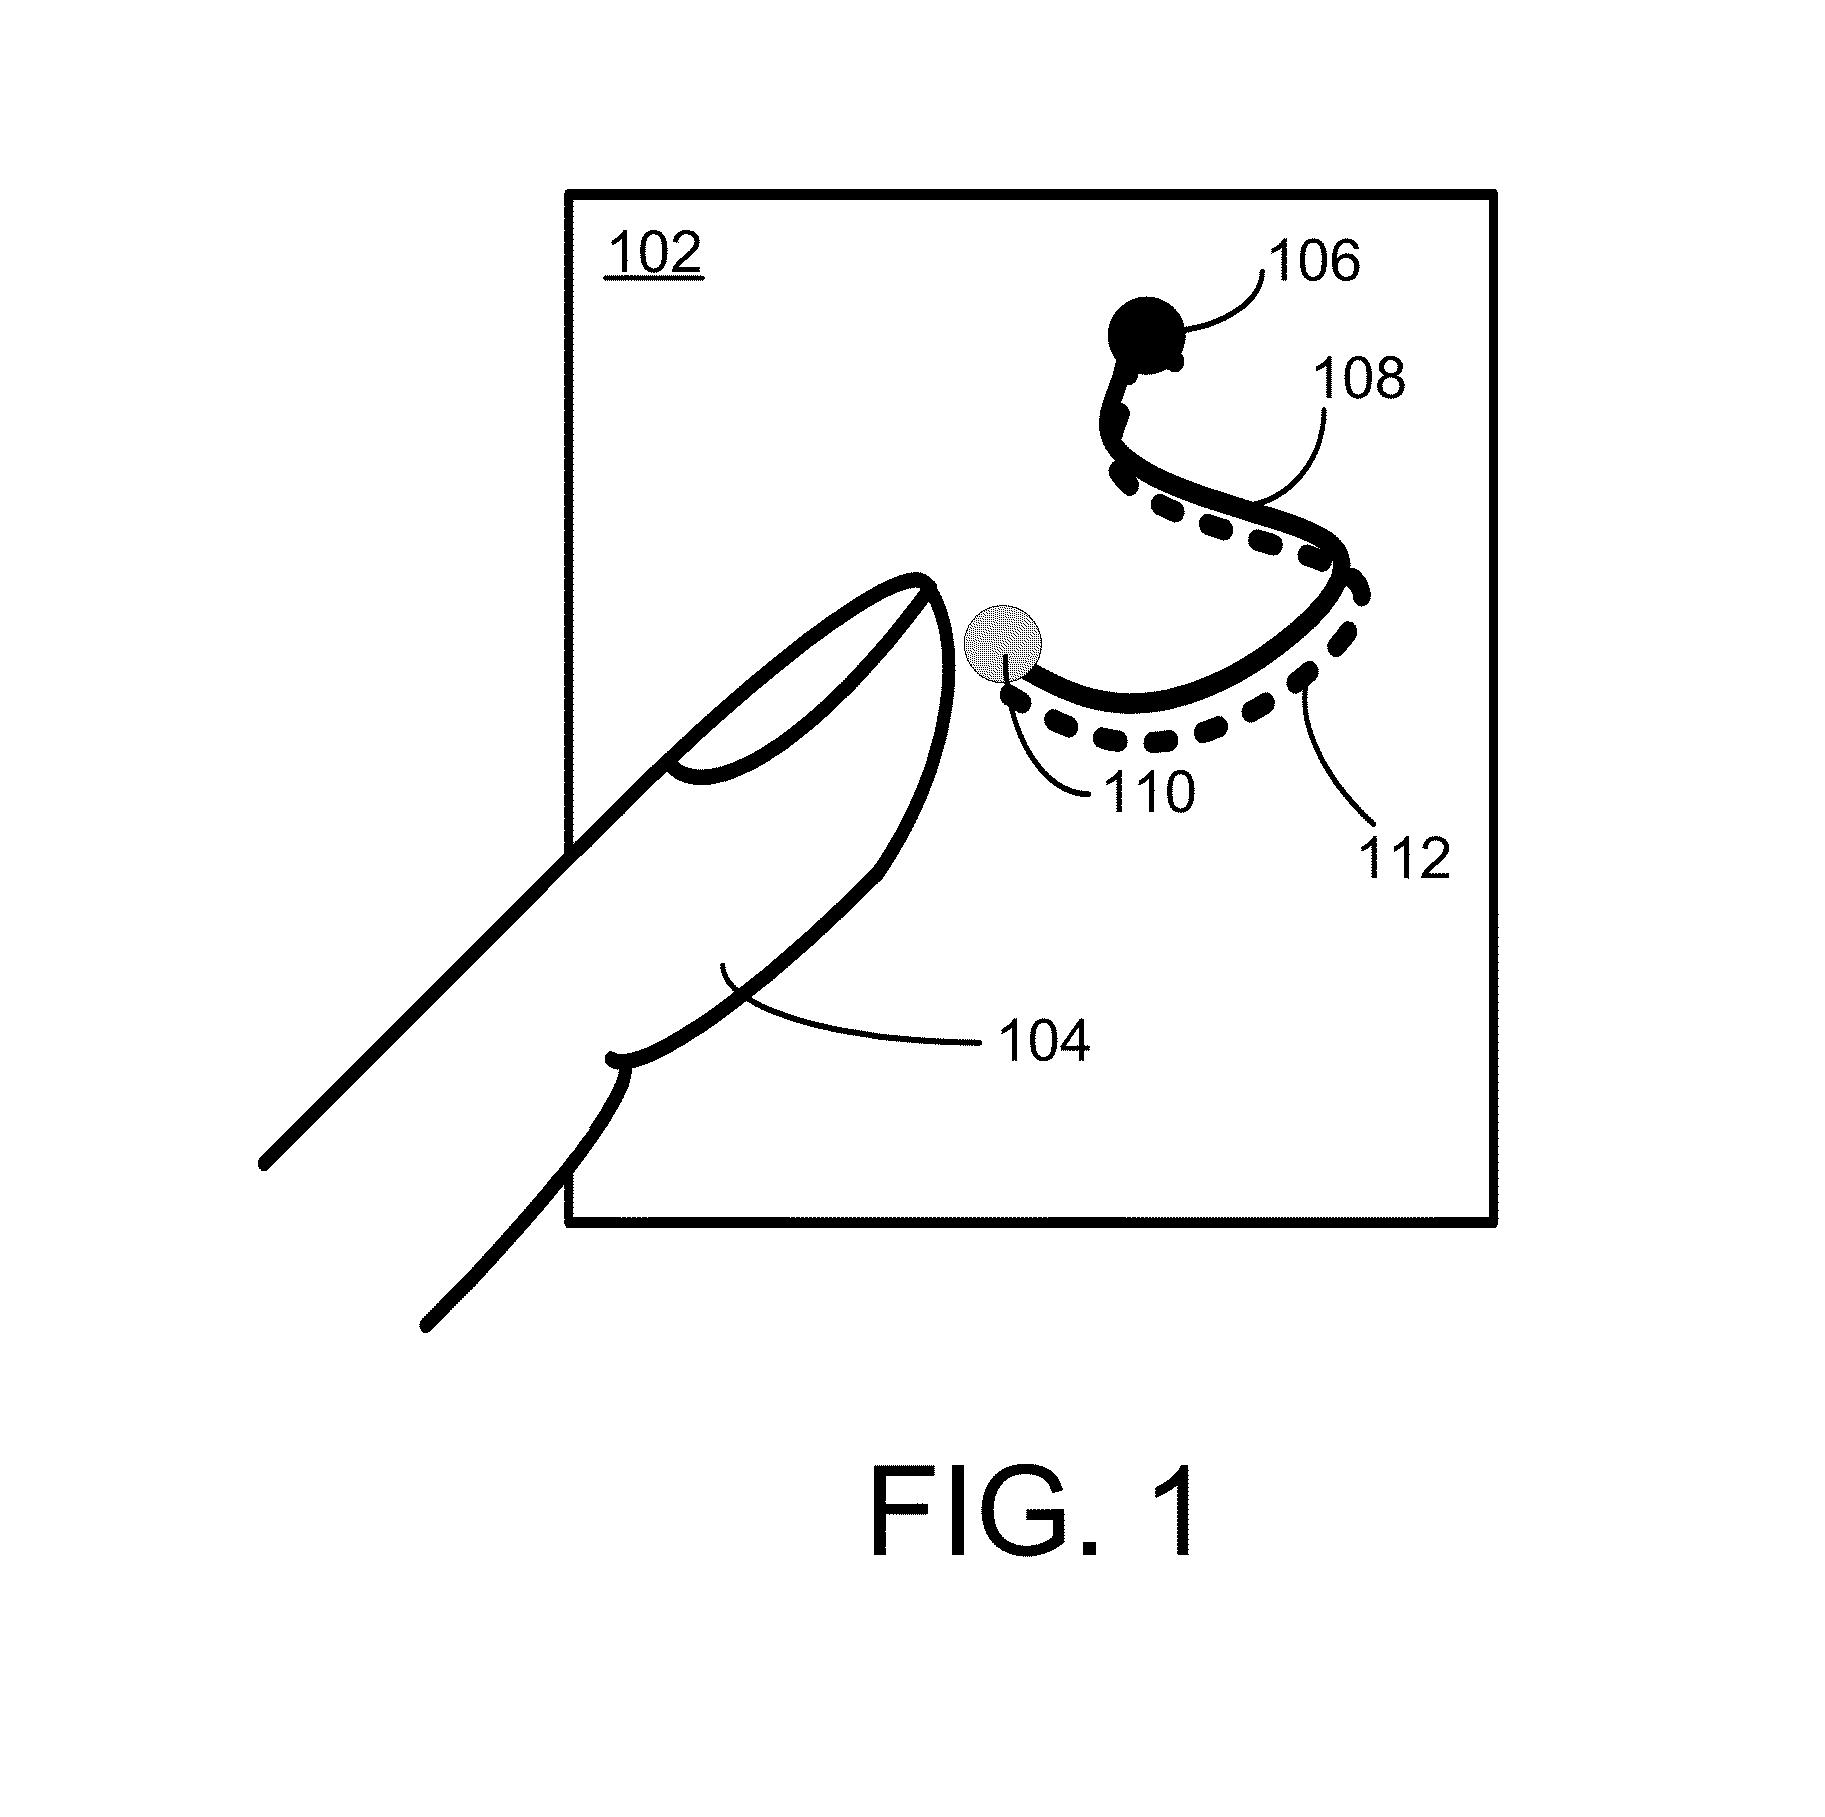 Systems and methods for improving image tracking based on touch events